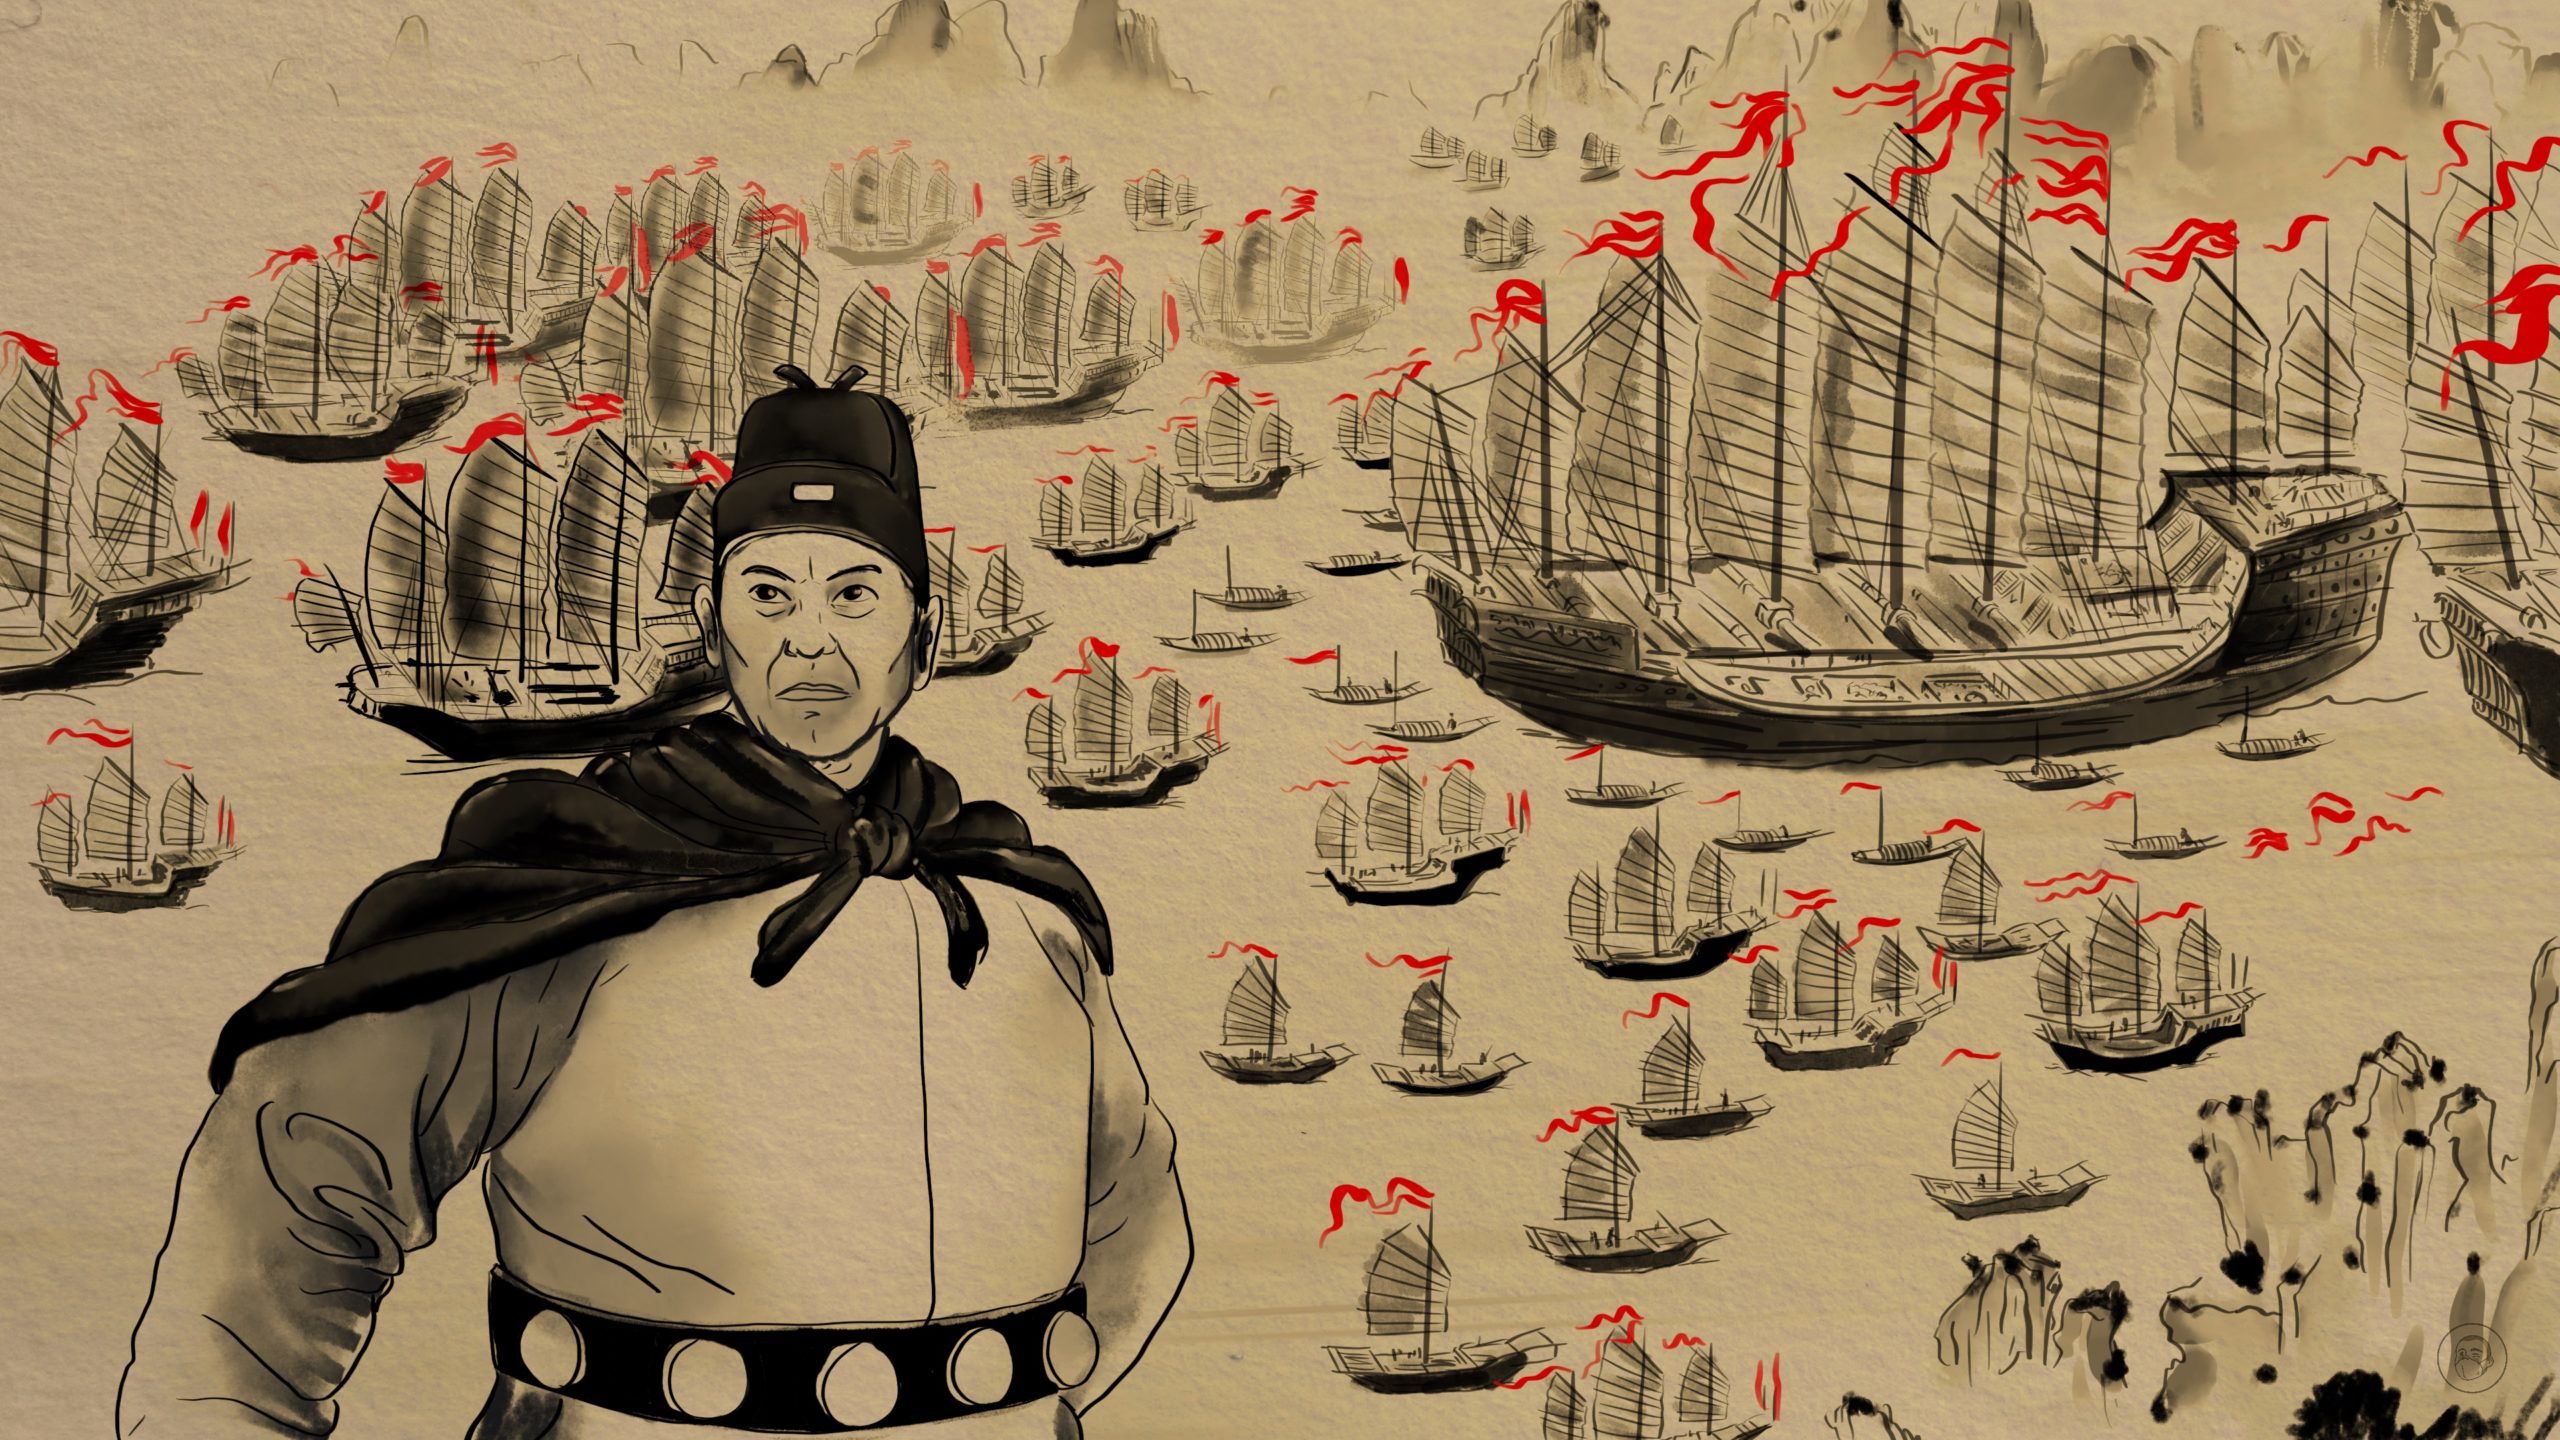 should zheng he's voyages be celebrated